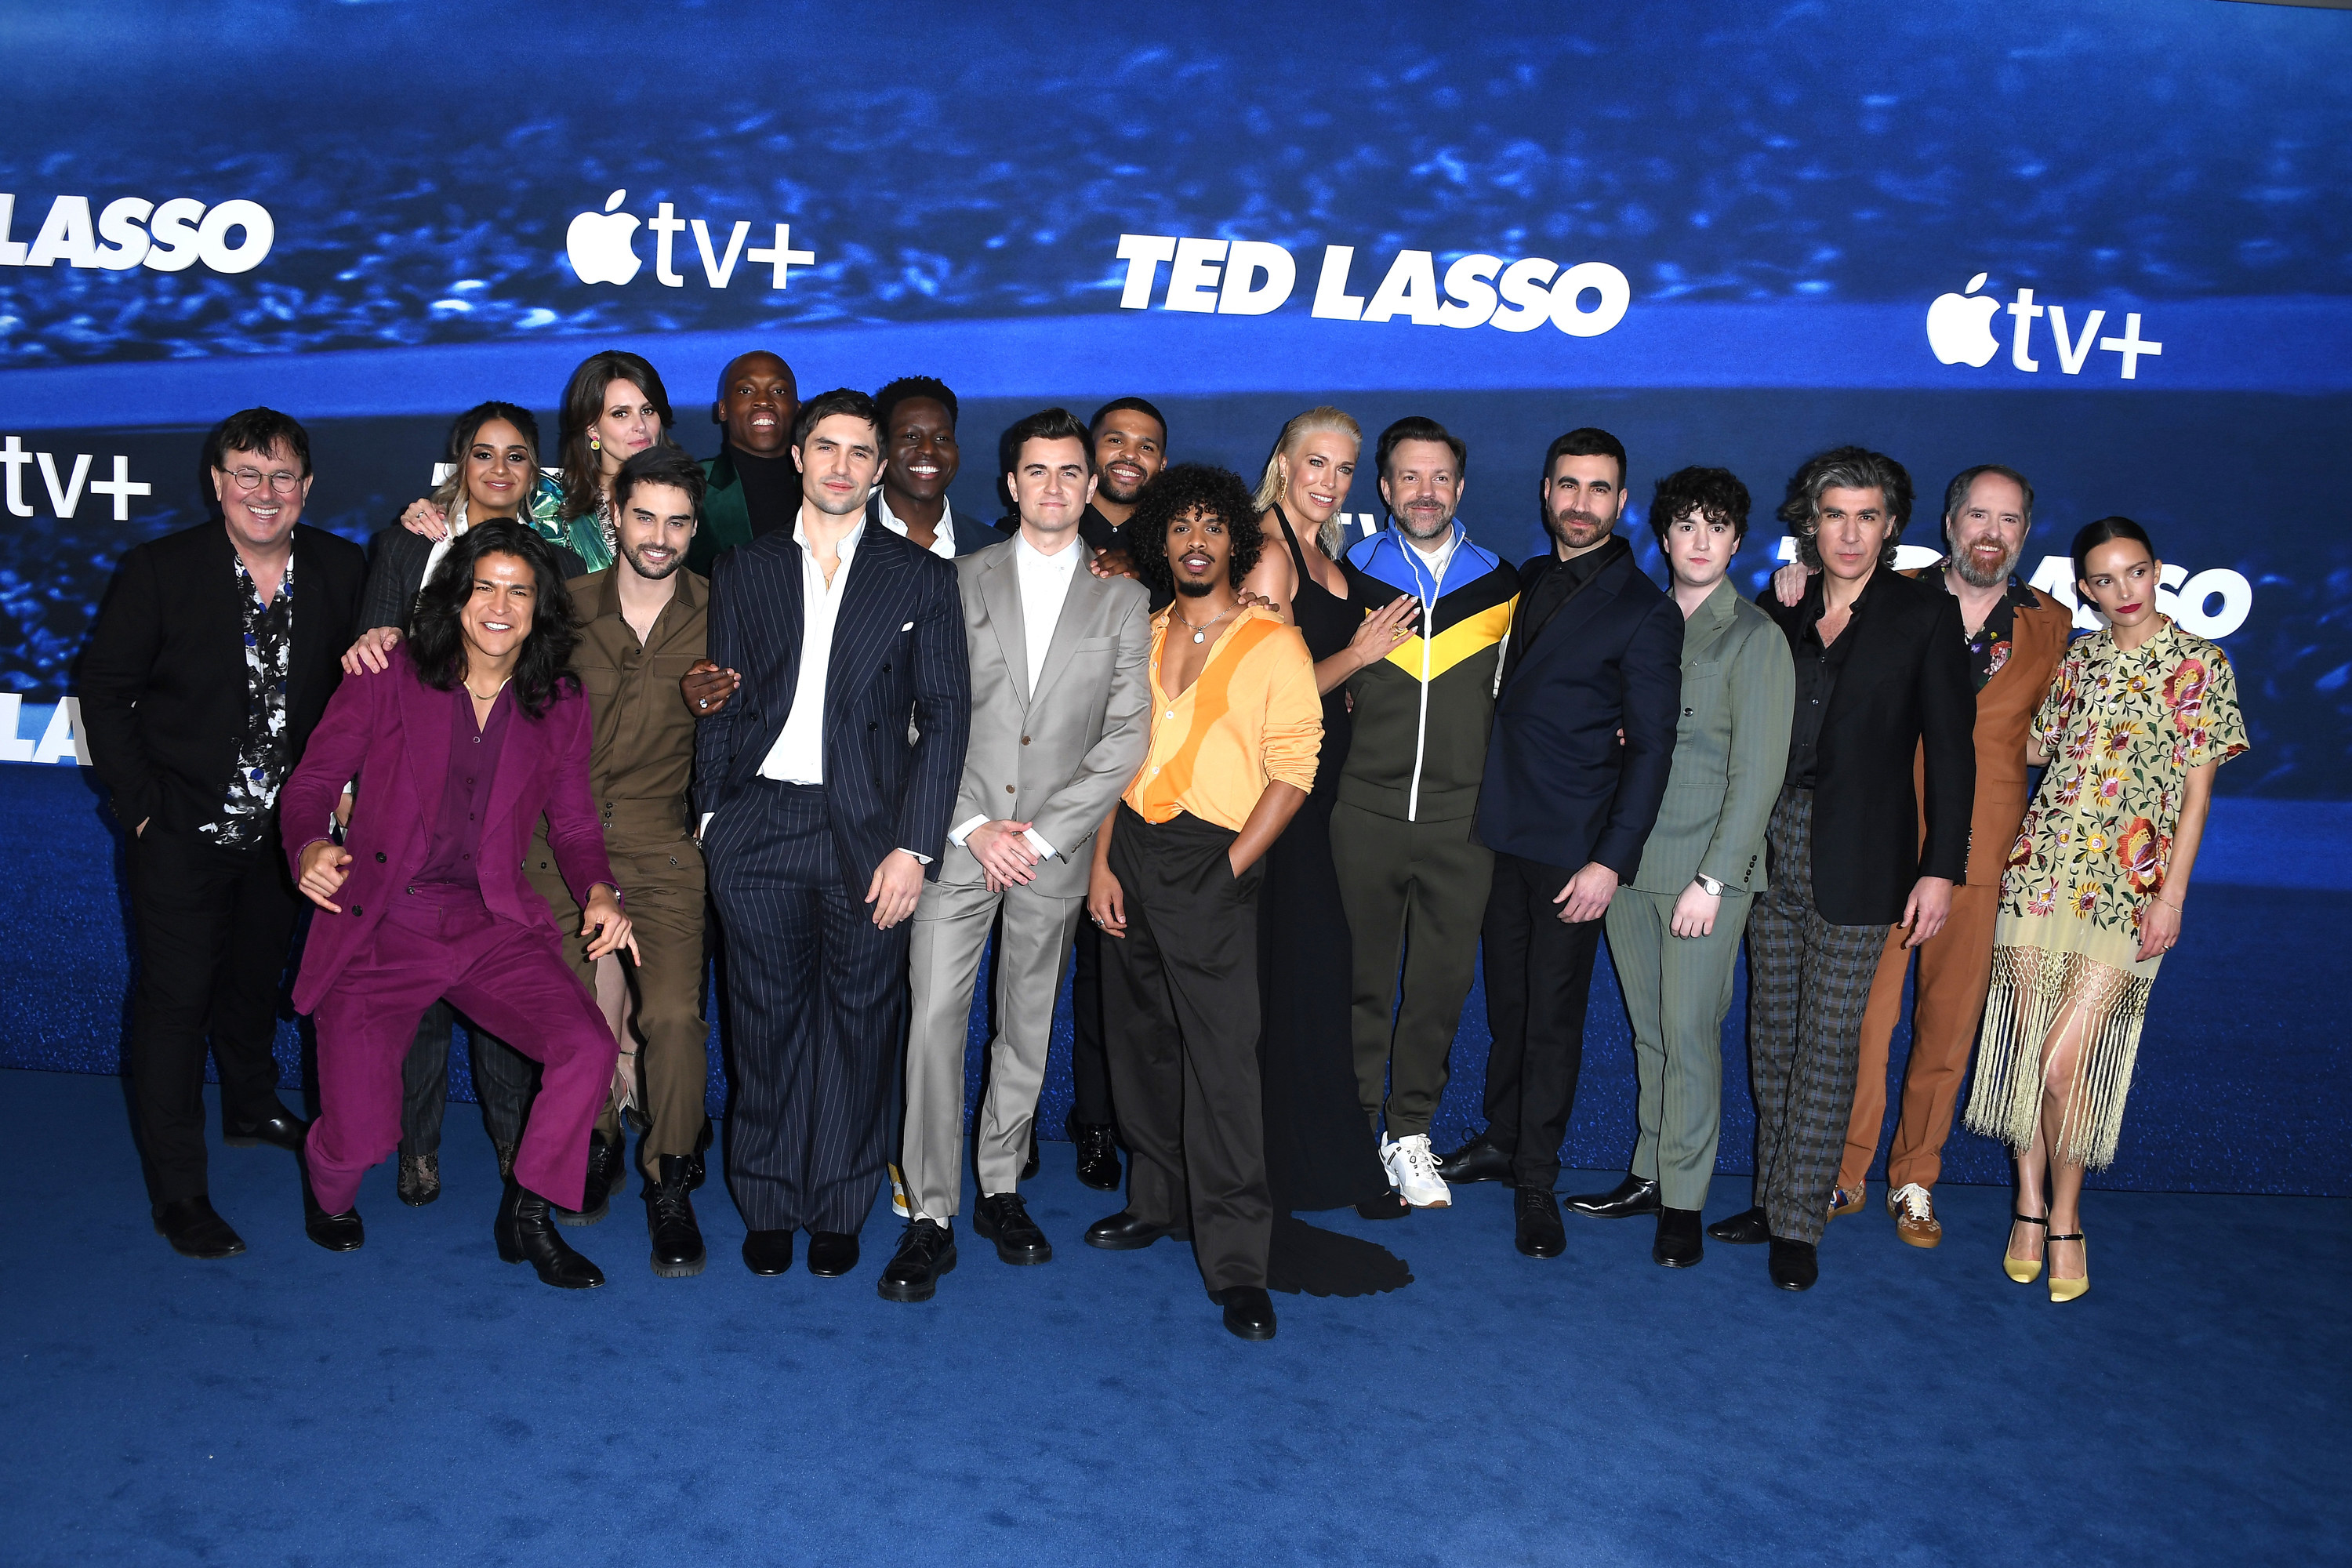 Jason and the entire cast pose on a red carpet